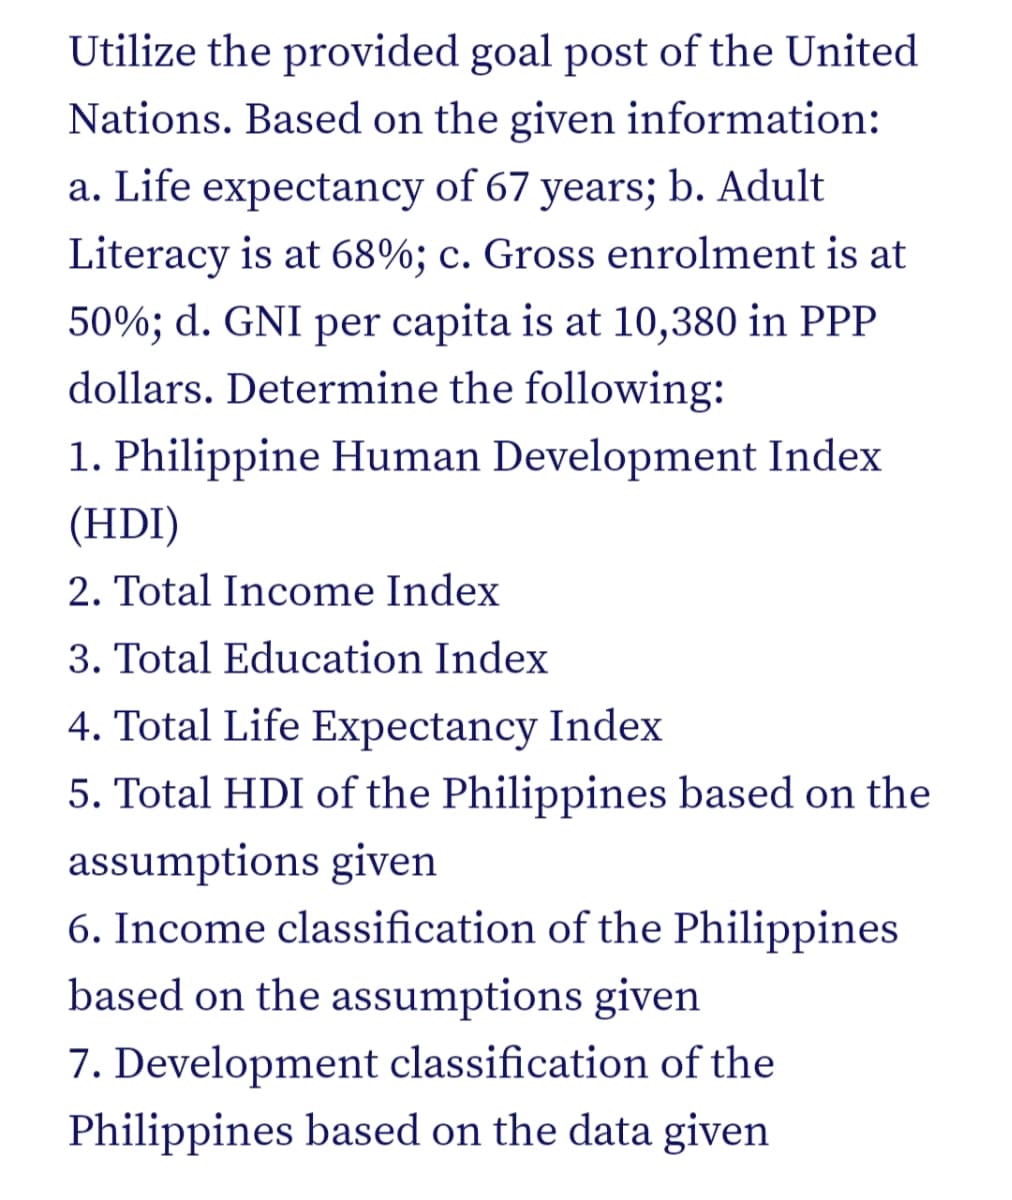 Utilize the provided goal post of the United
Nations. Based on the given information:
a. Life expectancy of 67 years; b. Adult
Literacy is at 68%; c. Gross enrolment is at
50%; d. GNI per capita is at 10,380 in PPP
dollars. Determine the following:
1. Philippine Human Development Index
(HDI)
2. Total Income Index
3. Total Education Index
4. Total Life Expectancy Index
5. Total HDI of the Philippines based on the
assumptions given
6. Income classification of the Philippines
based on the assumptions given
7. Development classification of the
Philippines based on the data given
